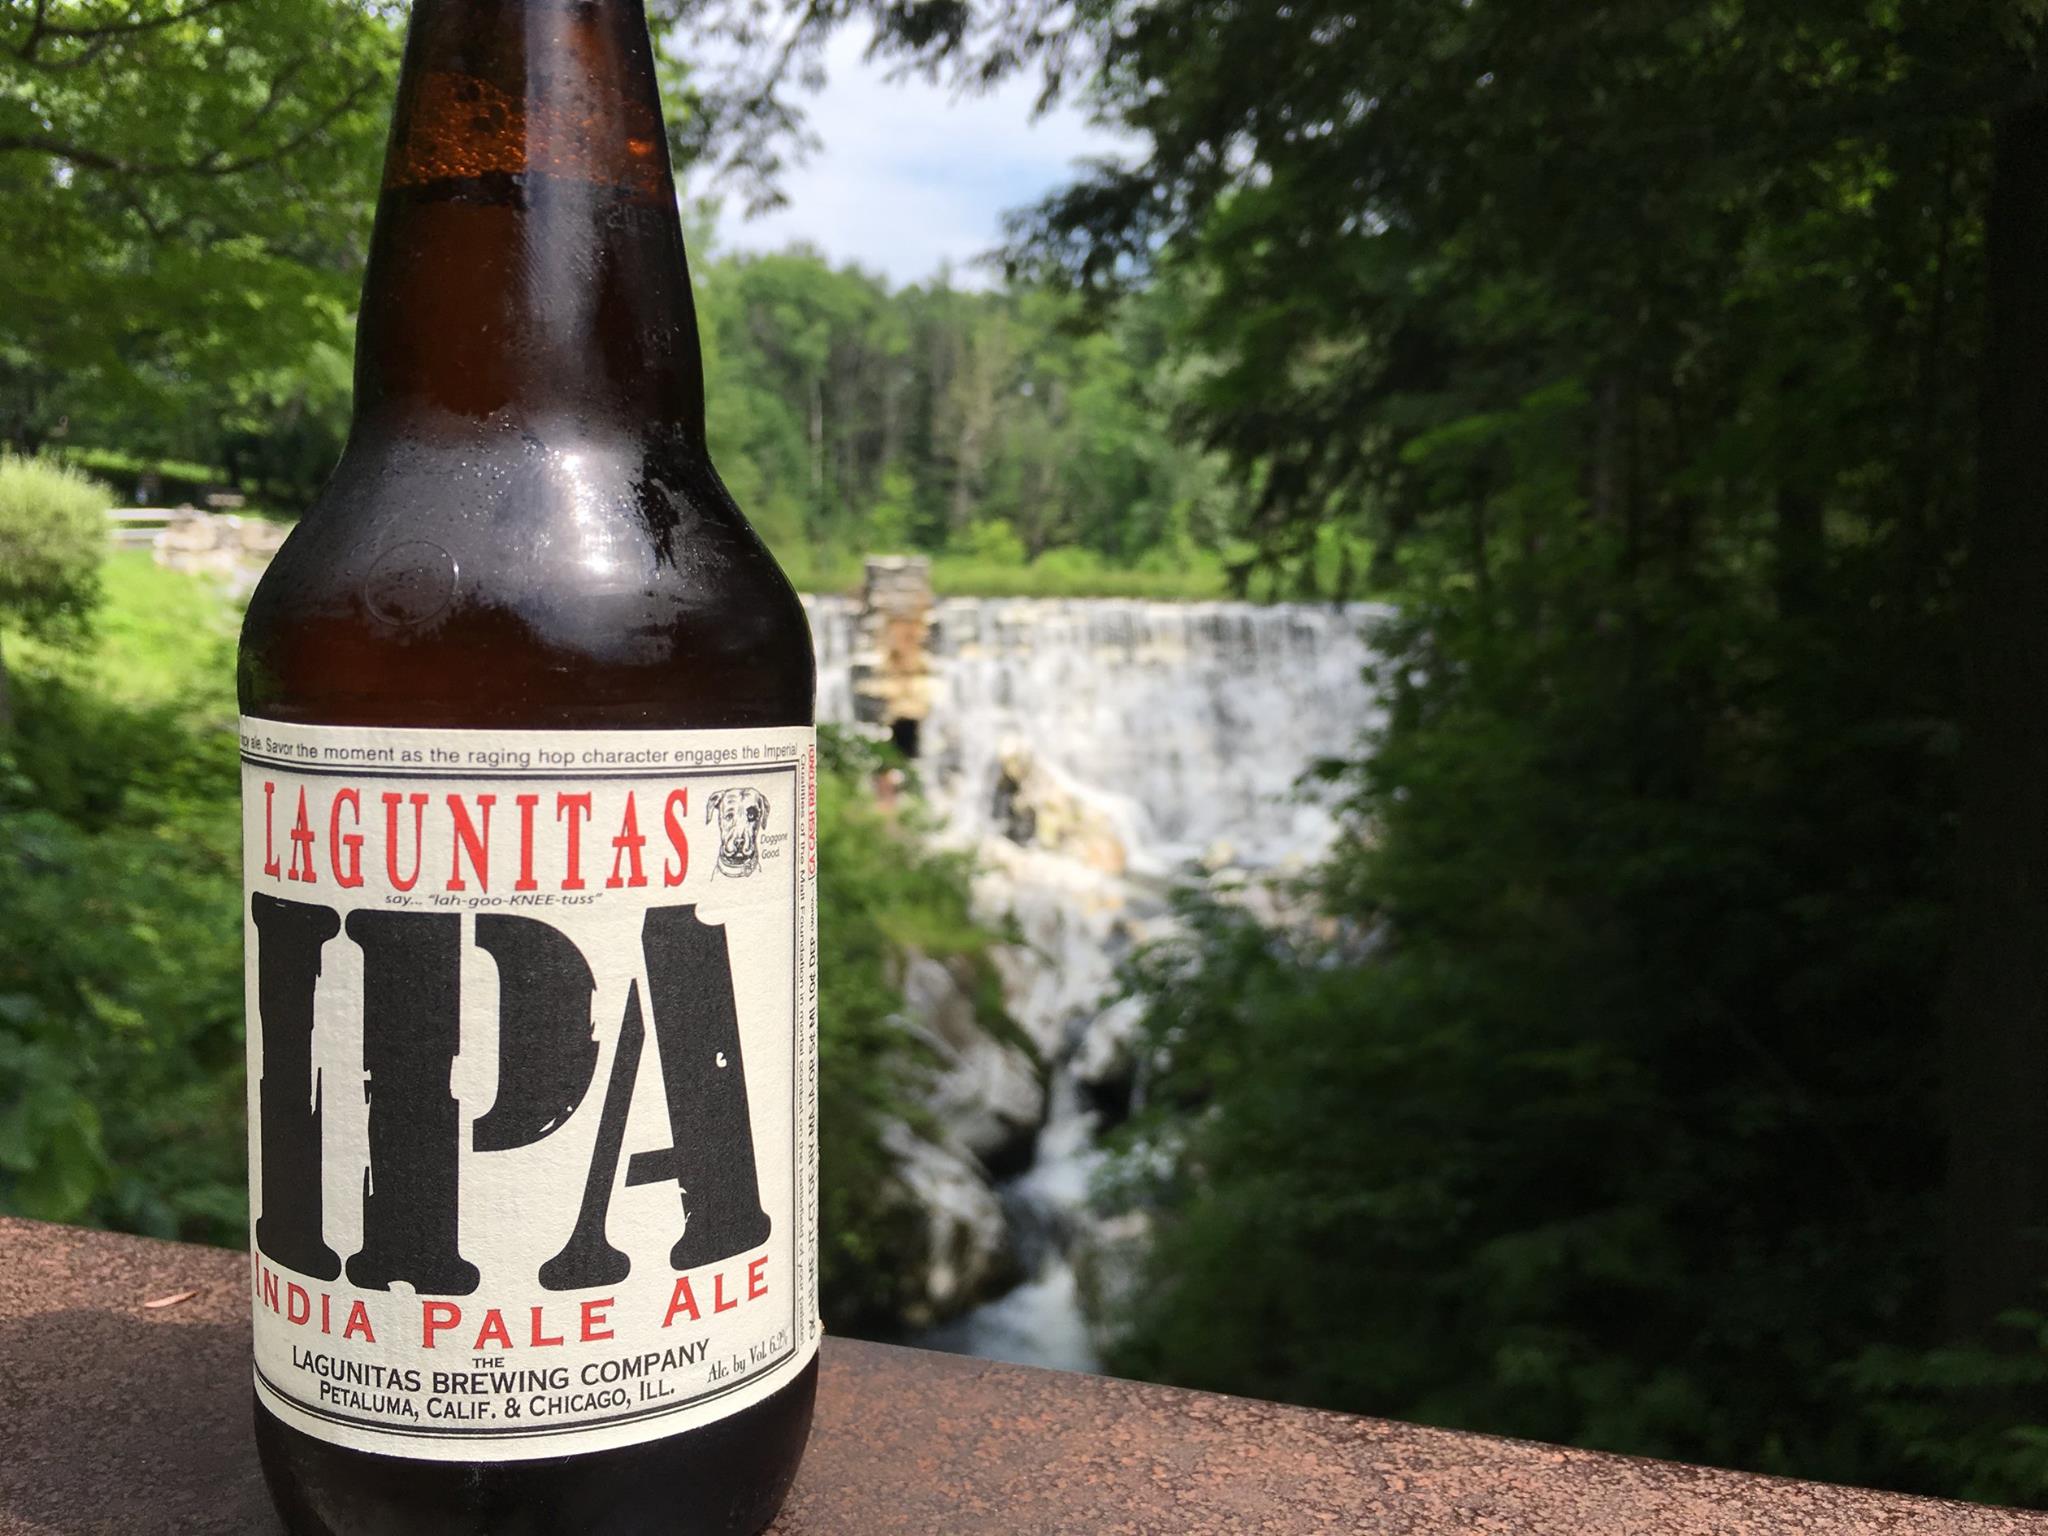 Lagunitas is Making Moves Both in Azusa and Abroad